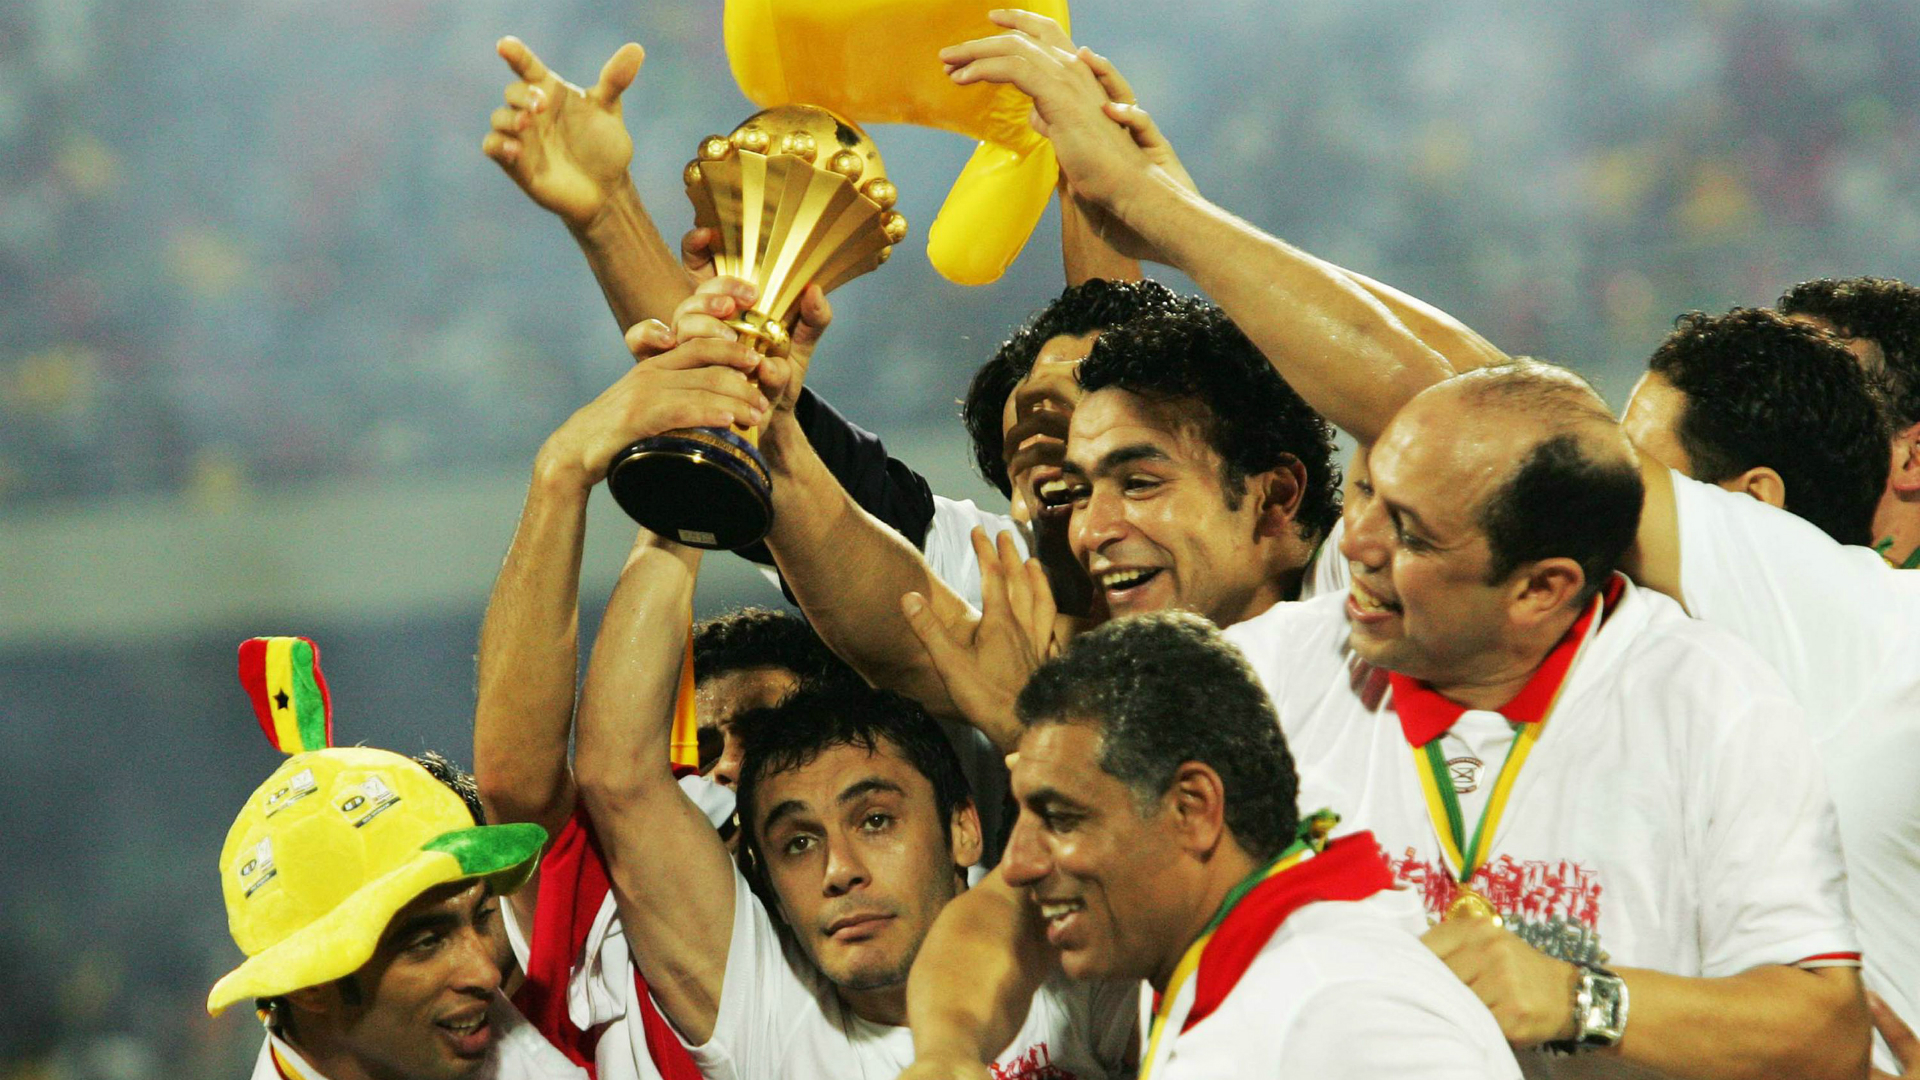 Caf ready to support Egypt with missing Afcon trophy